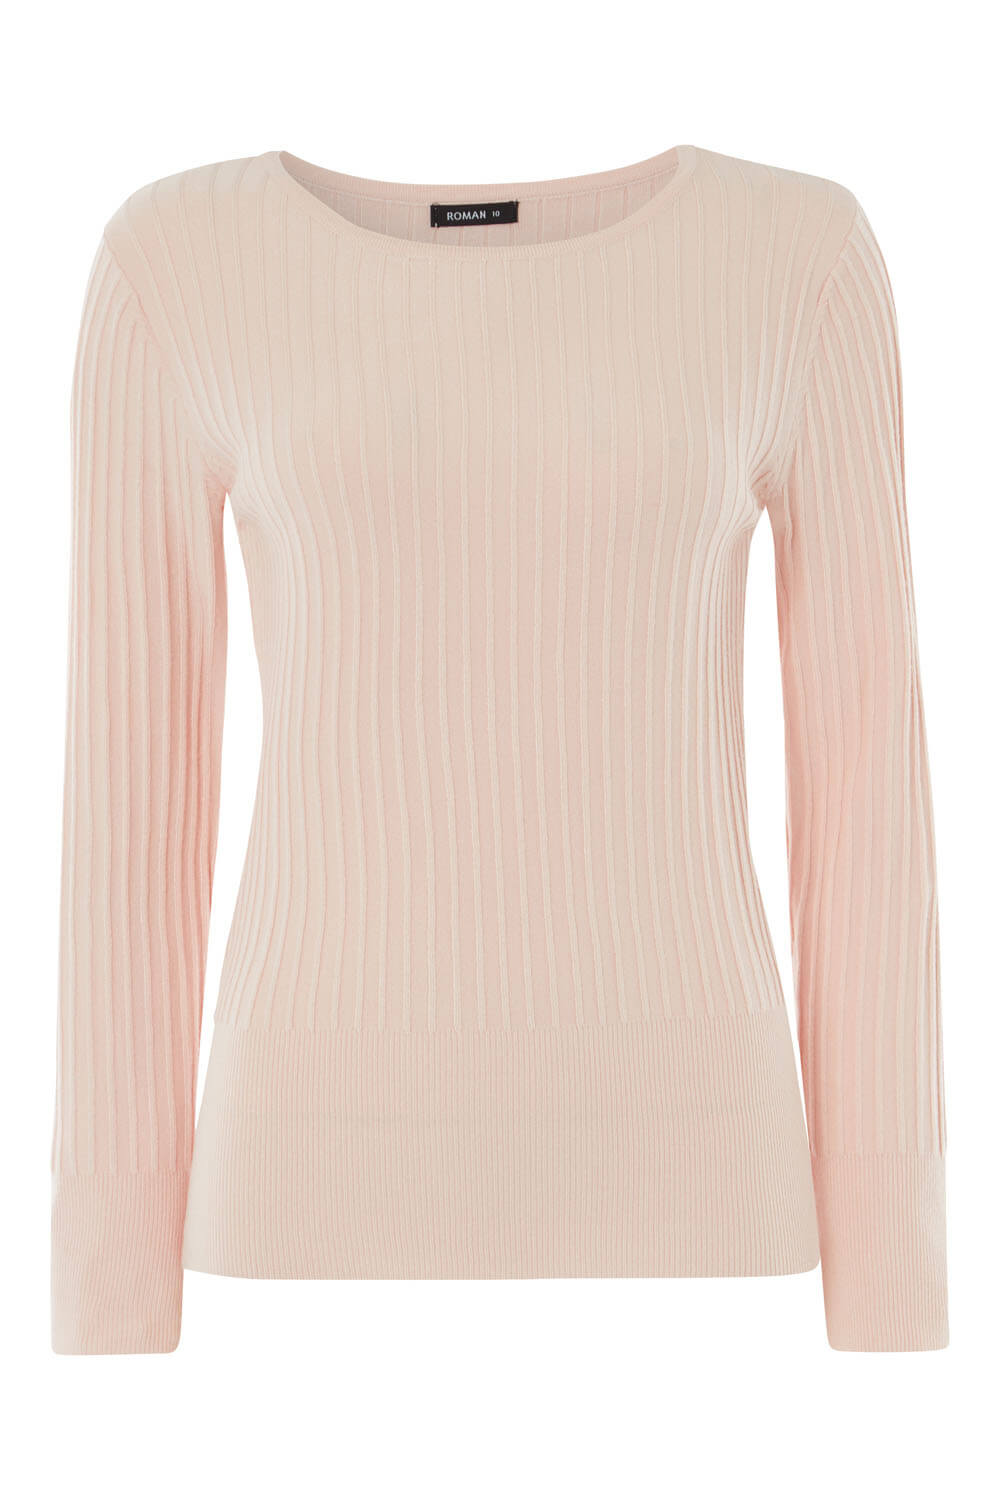 Light Pink Ribbed Textured Jumper , Image 5 of 5